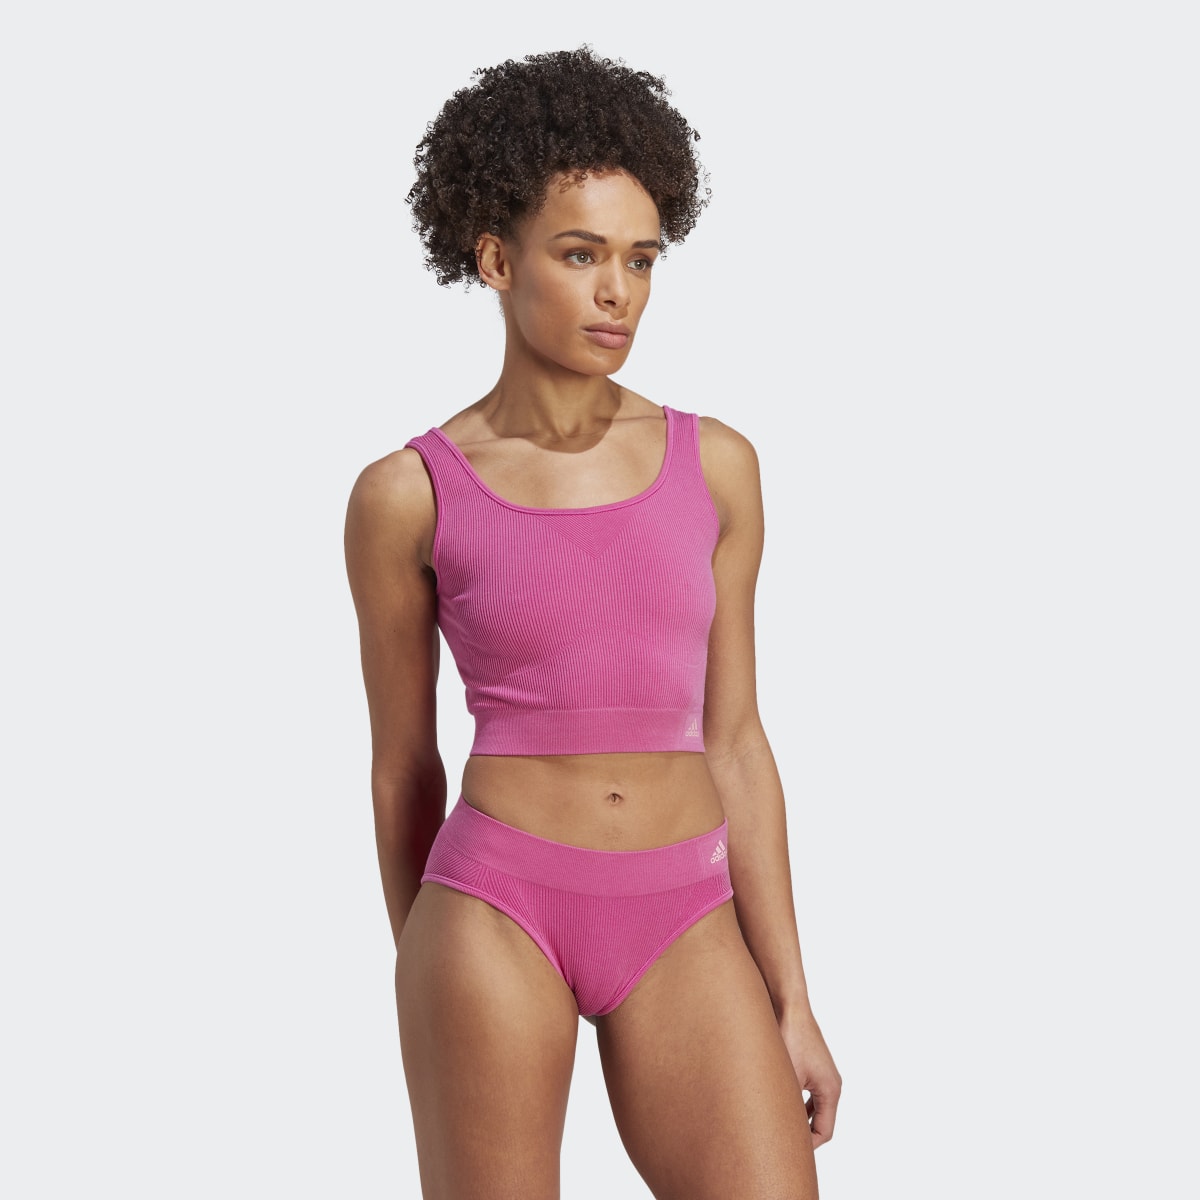 Adidas Ribbed Active Seamless Cropped Tank Top Underwear. 4